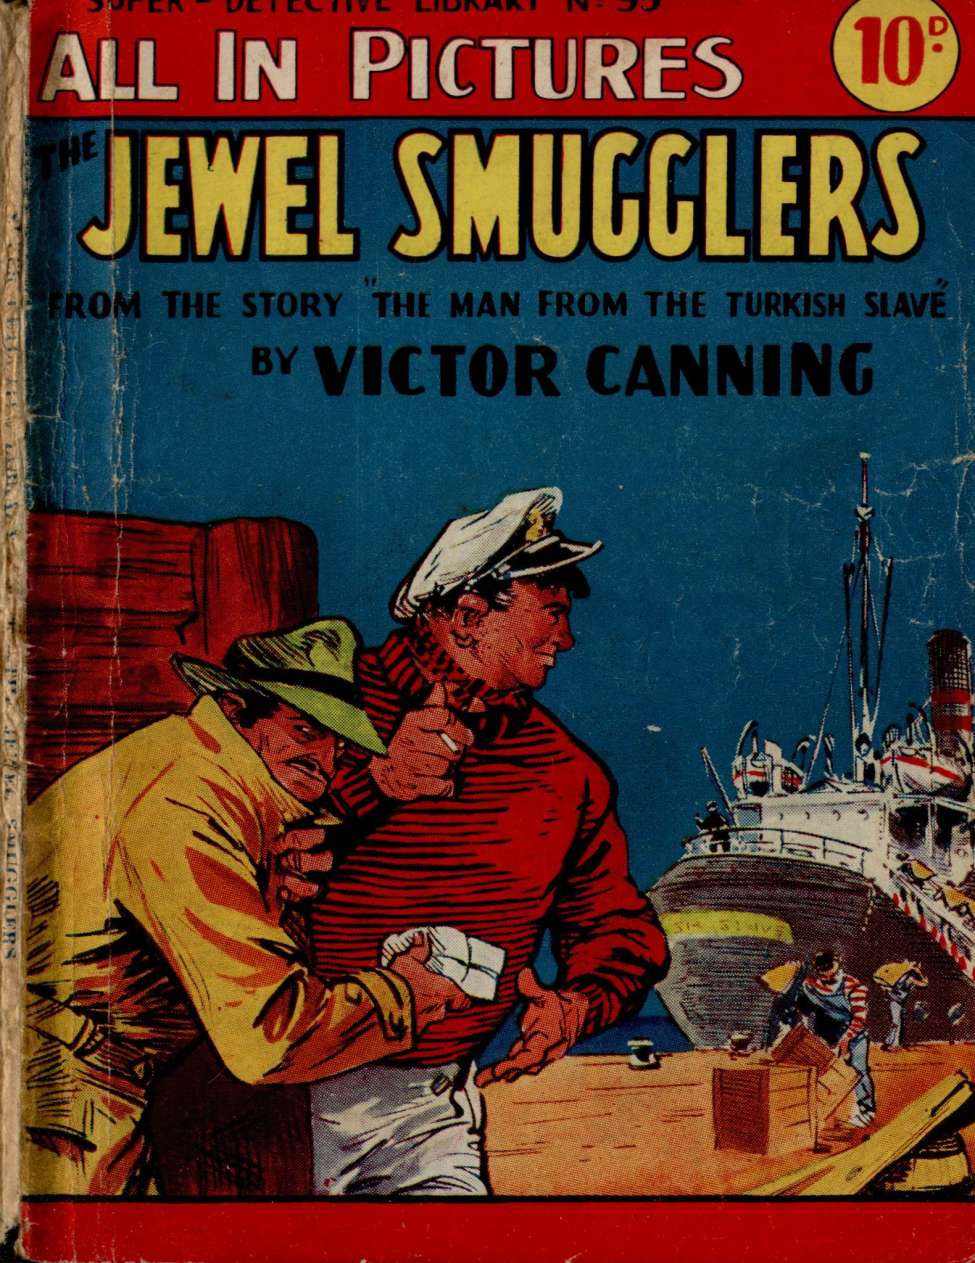 Book Cover For Super Detective Library 95 - The Jewel Smugglers